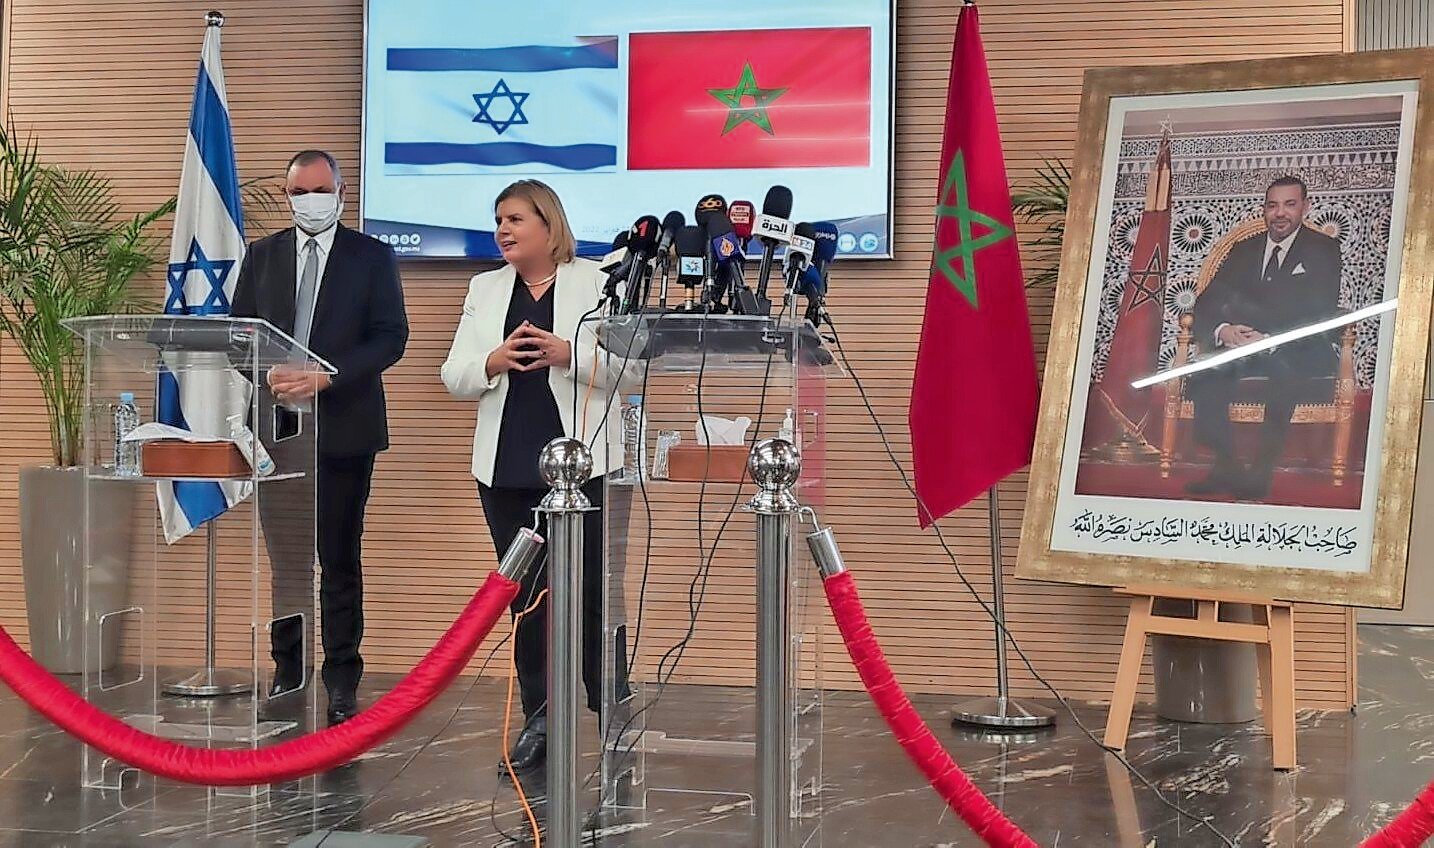 Israel’s Economy Minister Orna Barbivai with Moroccan Minister of Industry and Trade Ryad Mezzour in Rabat, Morocco, on Feb. 21, 2022.